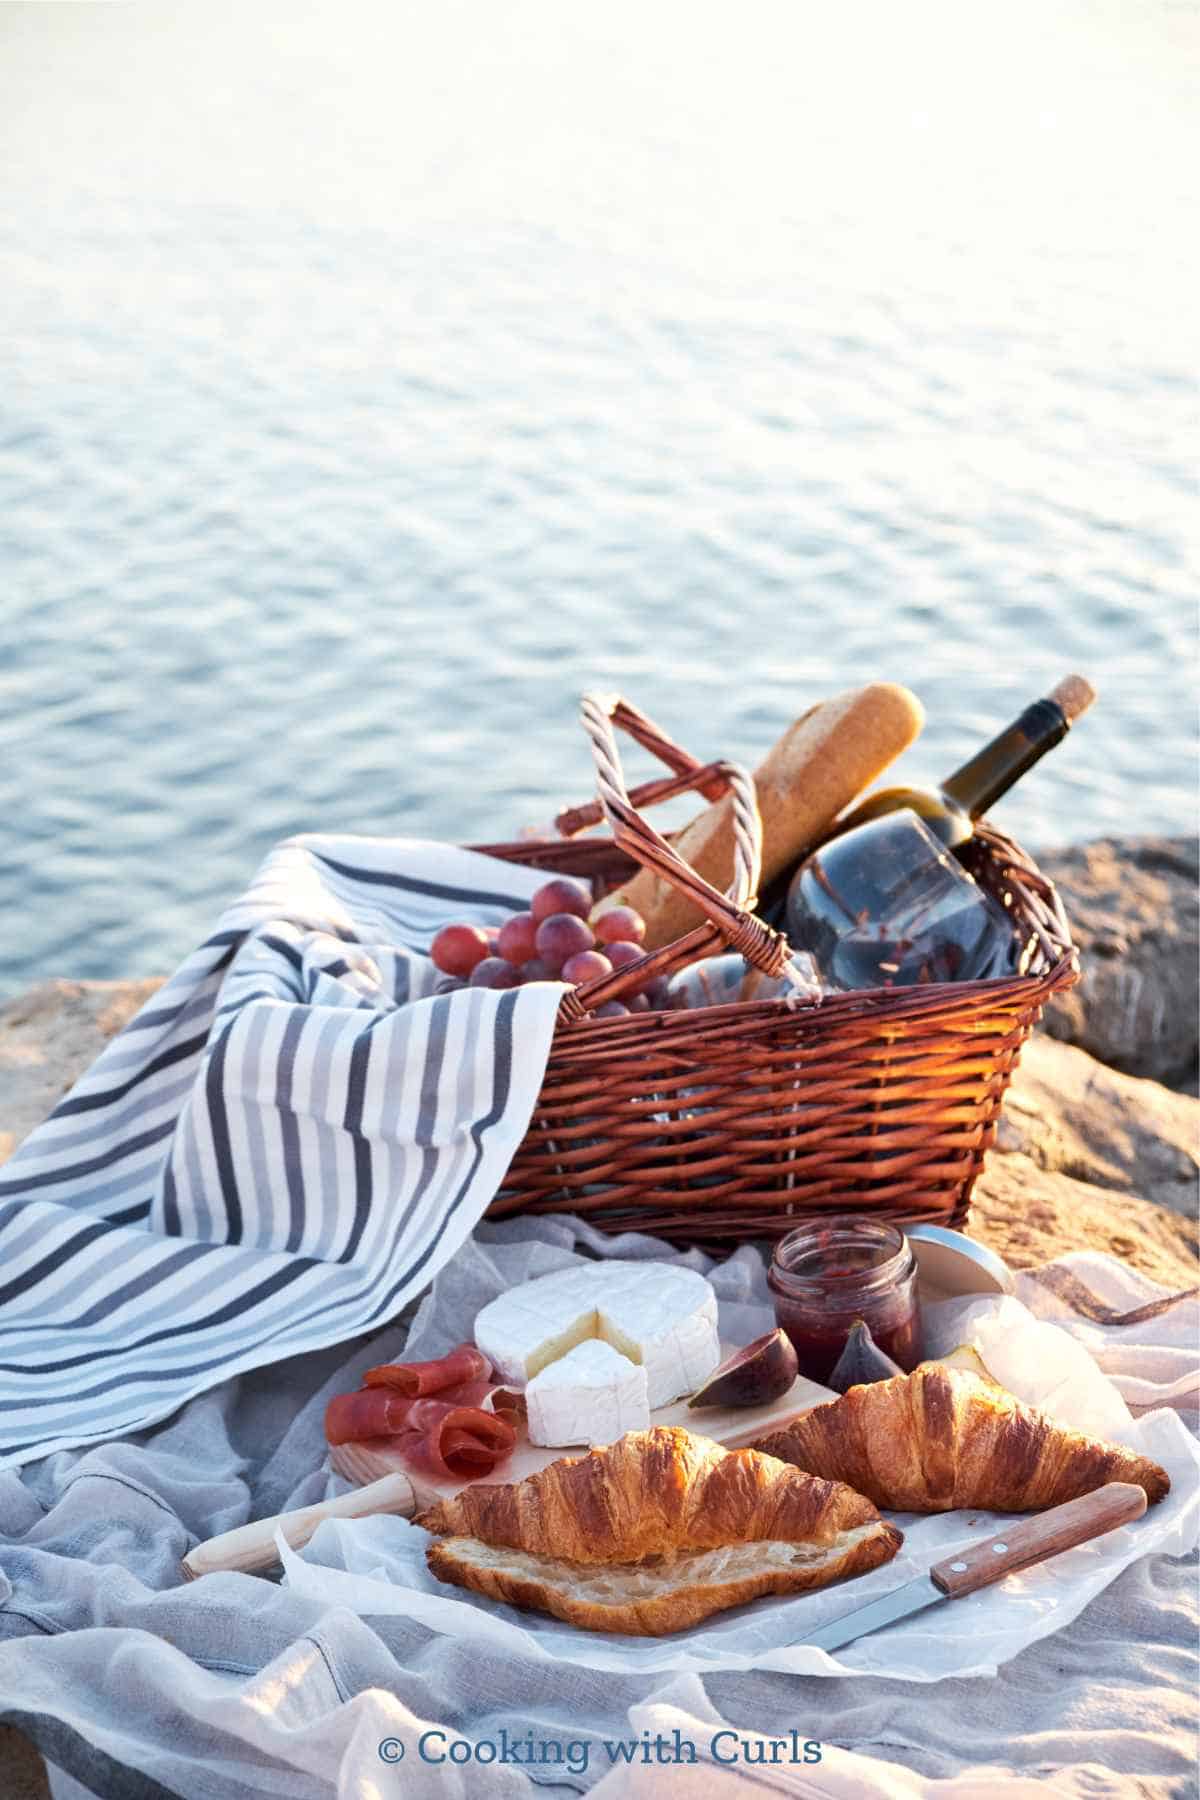 A picnic basket filled with grapes, wine, and baguette sitting on a blanket with croissants, brie, and jam near the water.